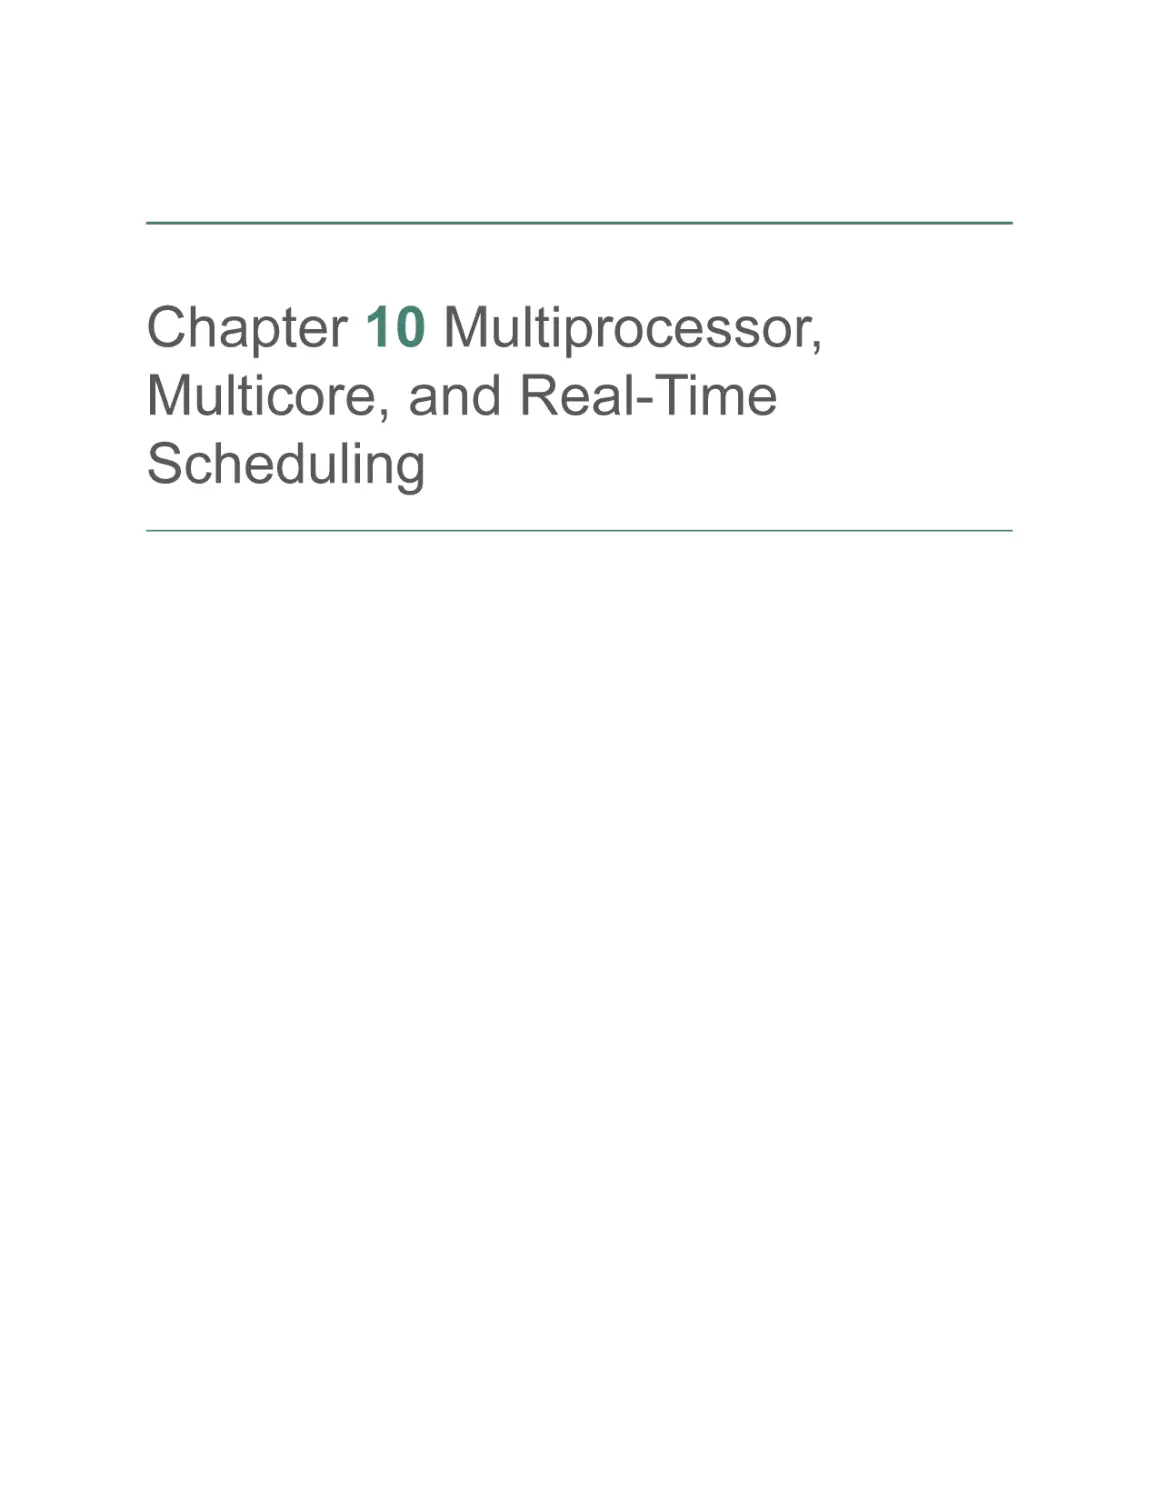 Chapter 10 Multiprocessor, Multicore, and Real-Time Scheduling